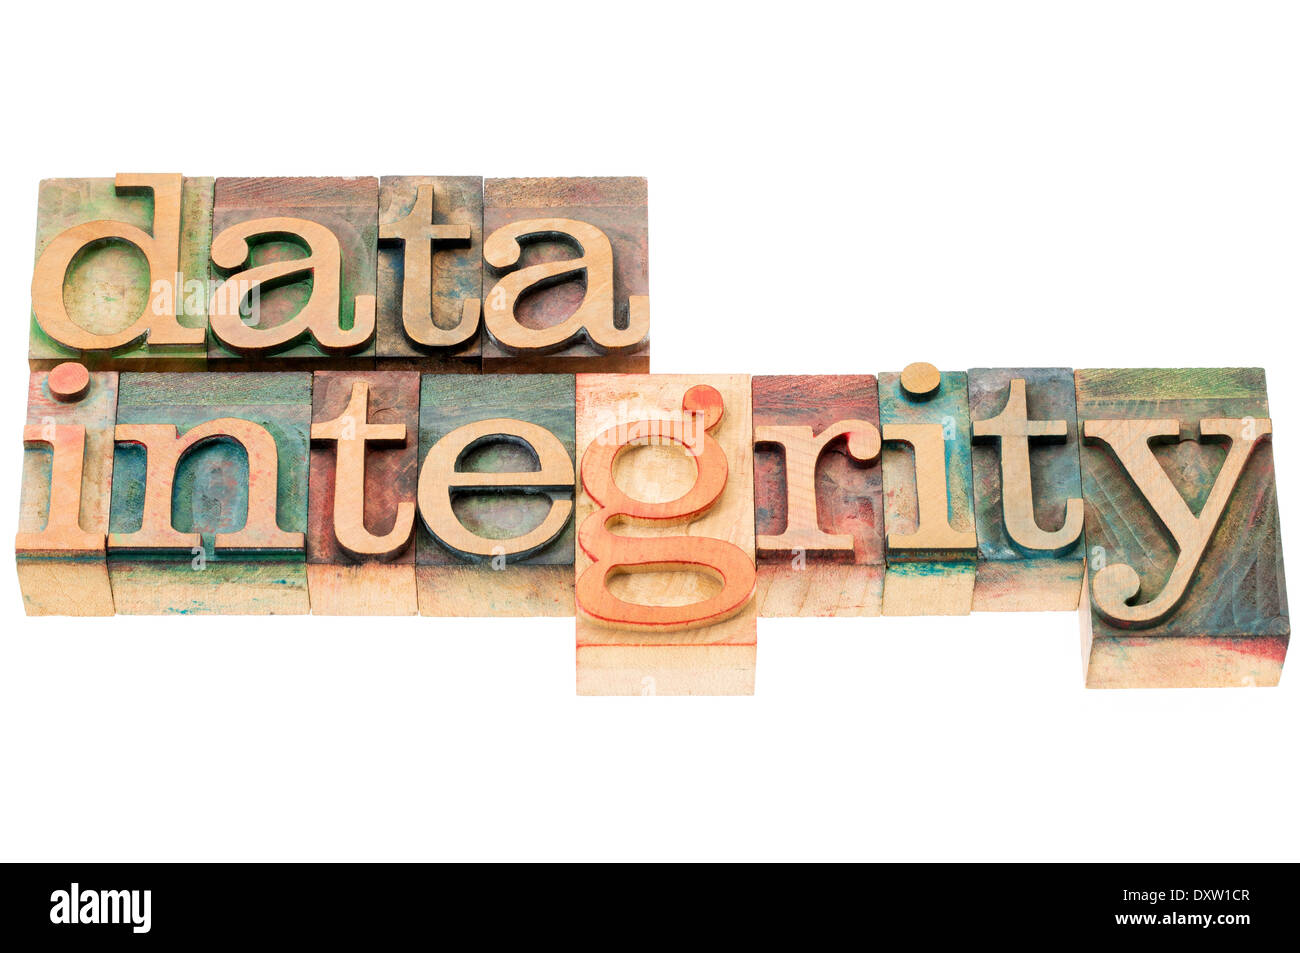 data integrity - isolated words in letterpress wood type blocks stained by color inks Stock Photo